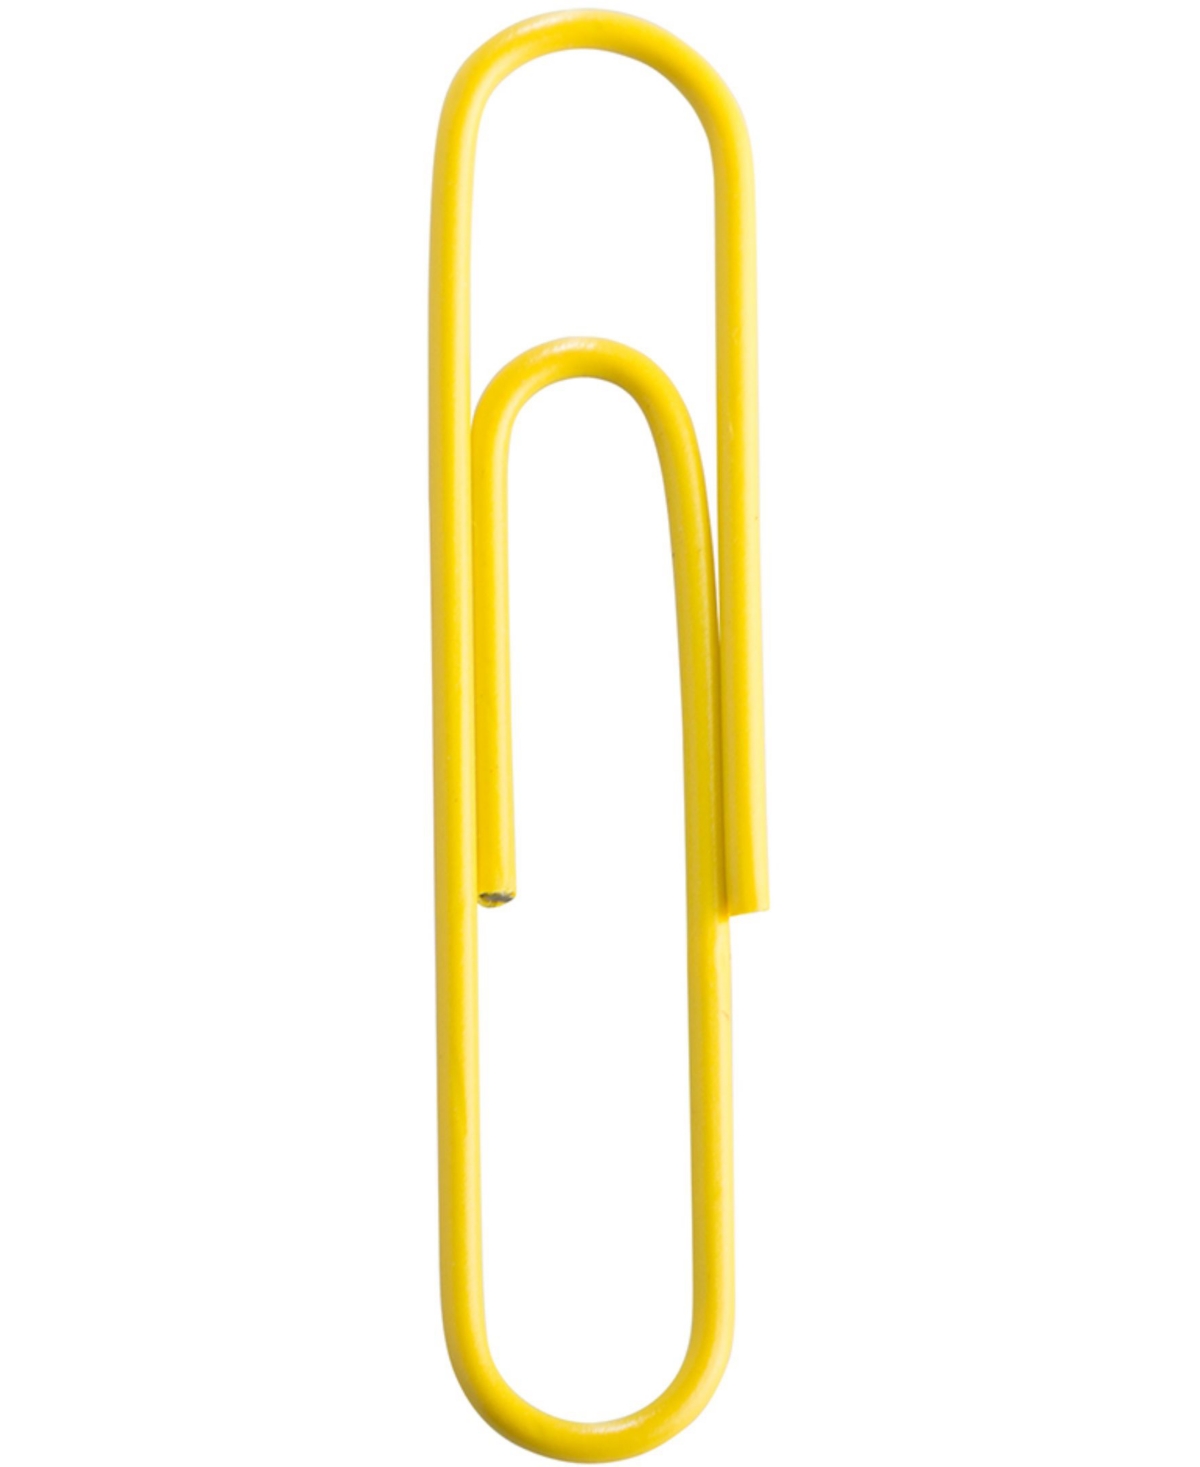 Shop Jam Paper Colorful Jumbo Paper Clips In Yellow